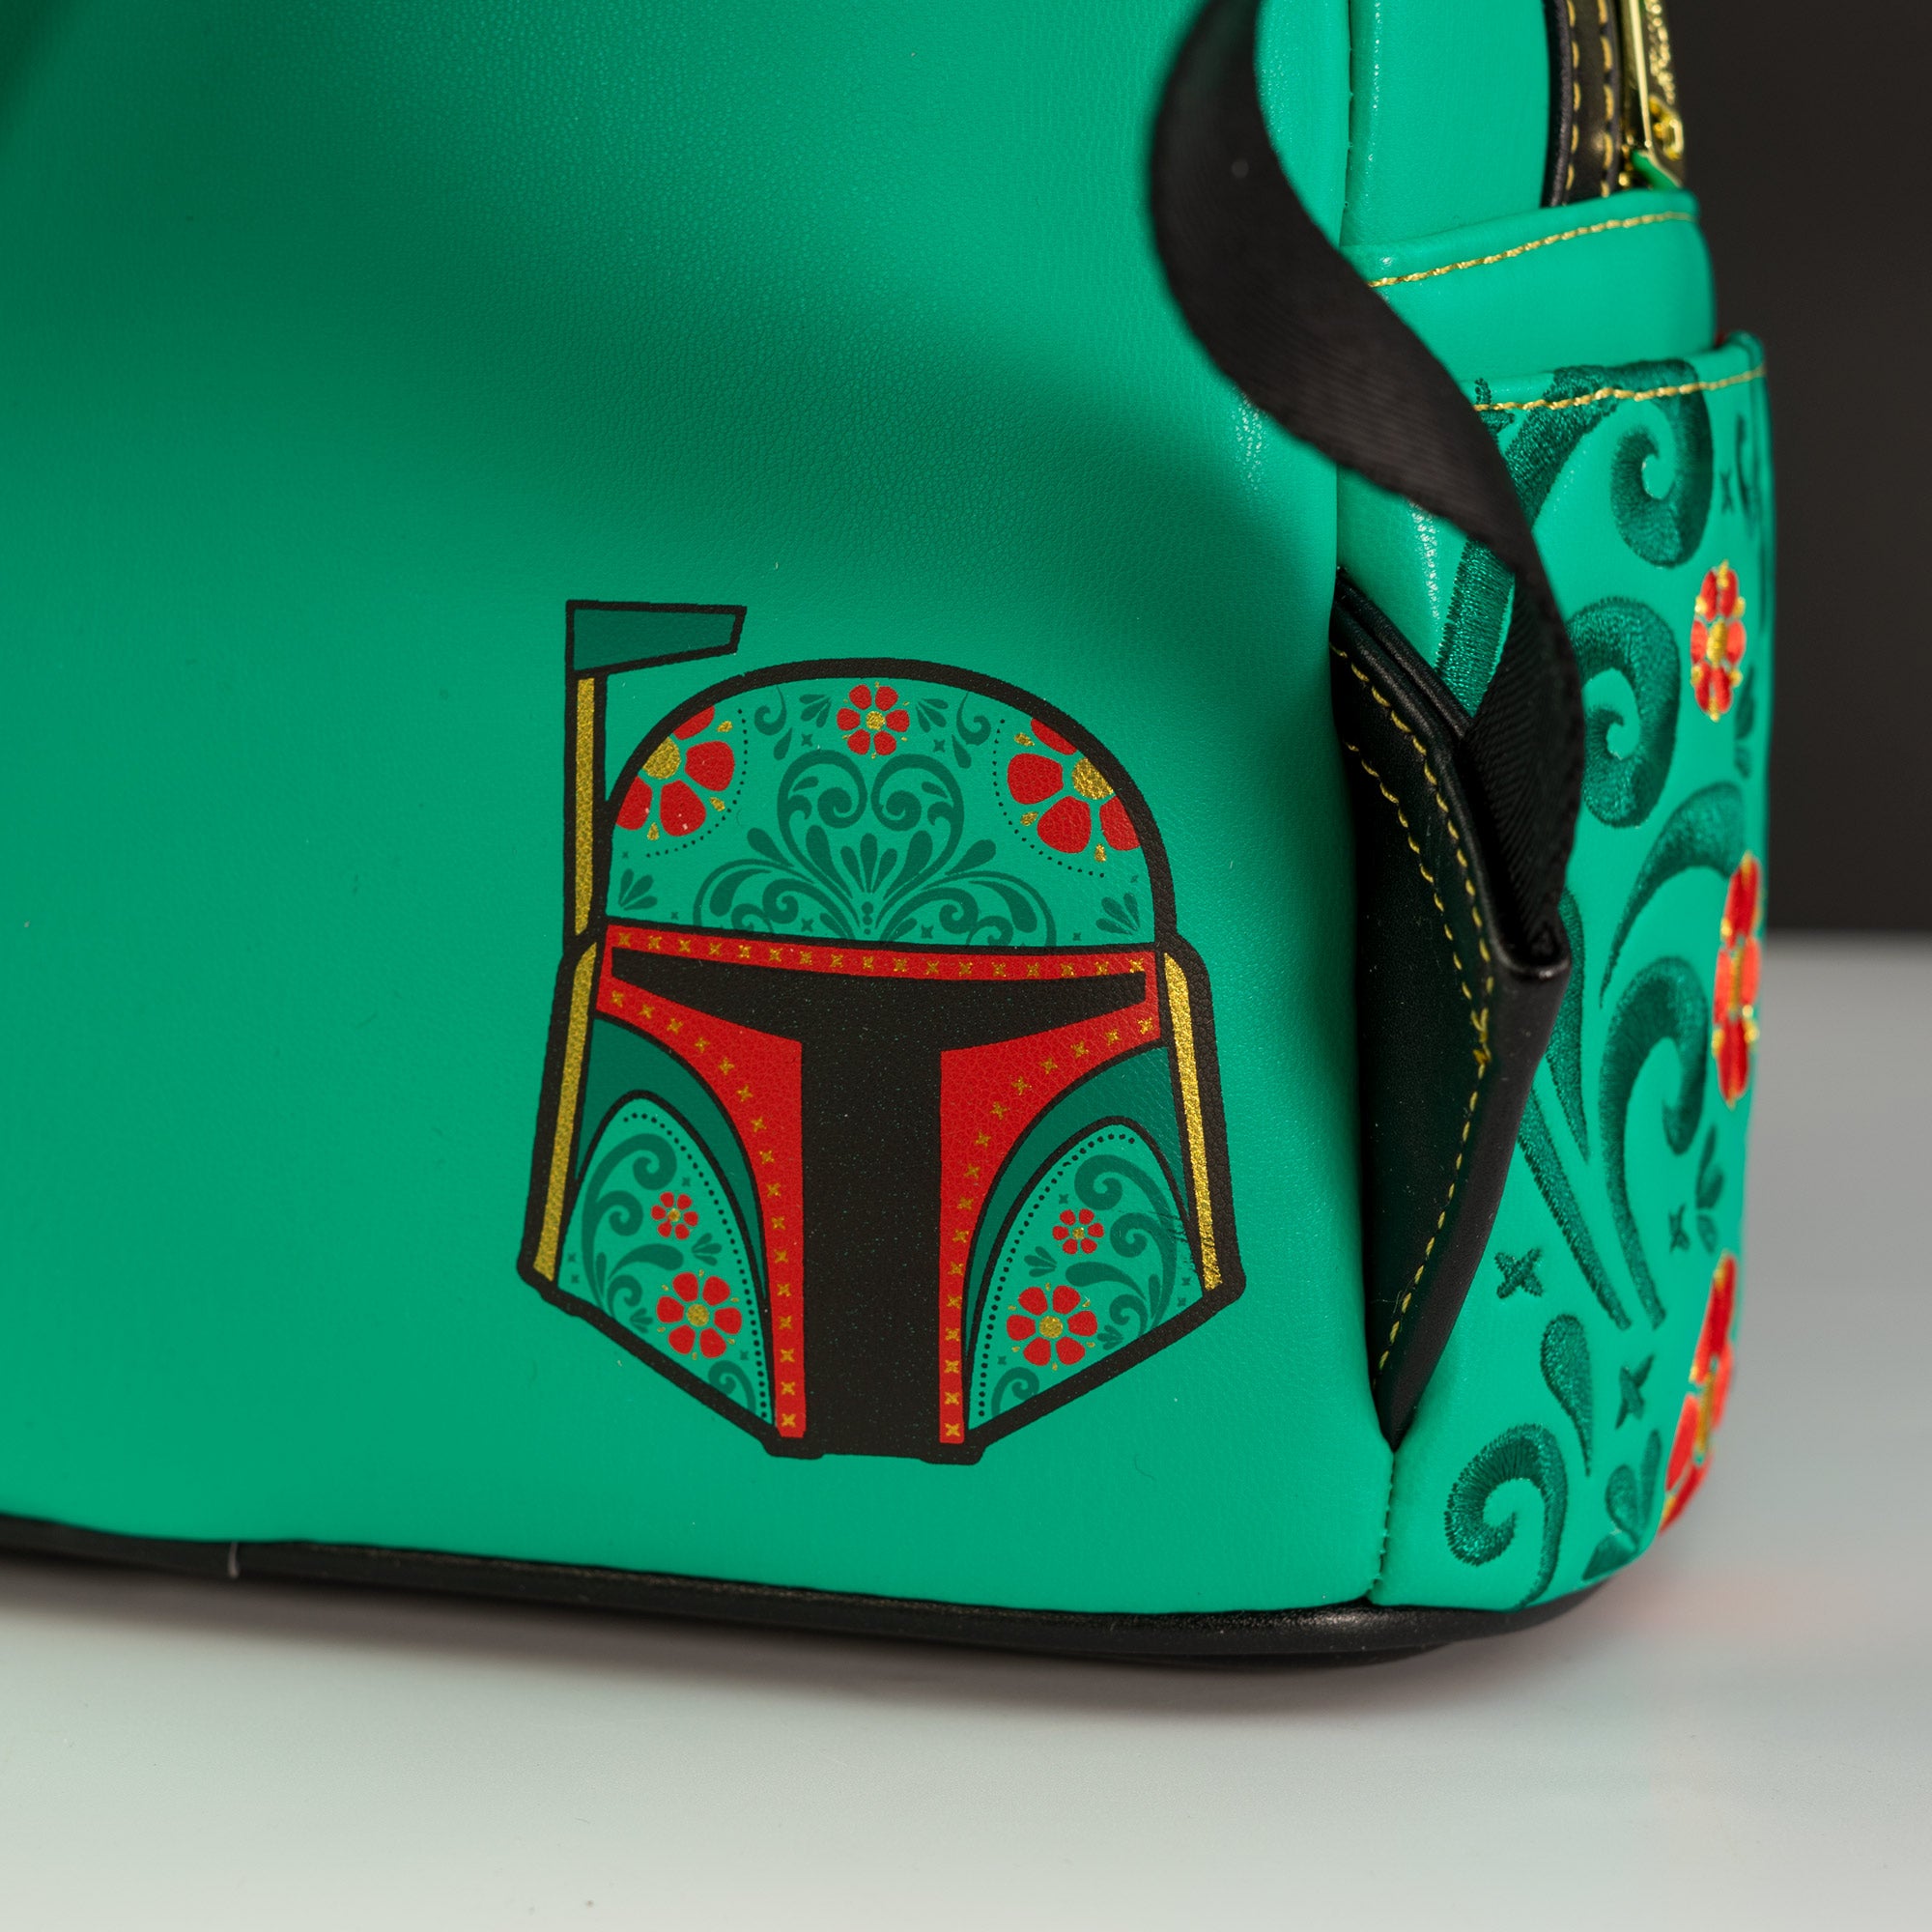 Loungefly x Star Wars Boba Fett Floral Cosplay Mini Backpack